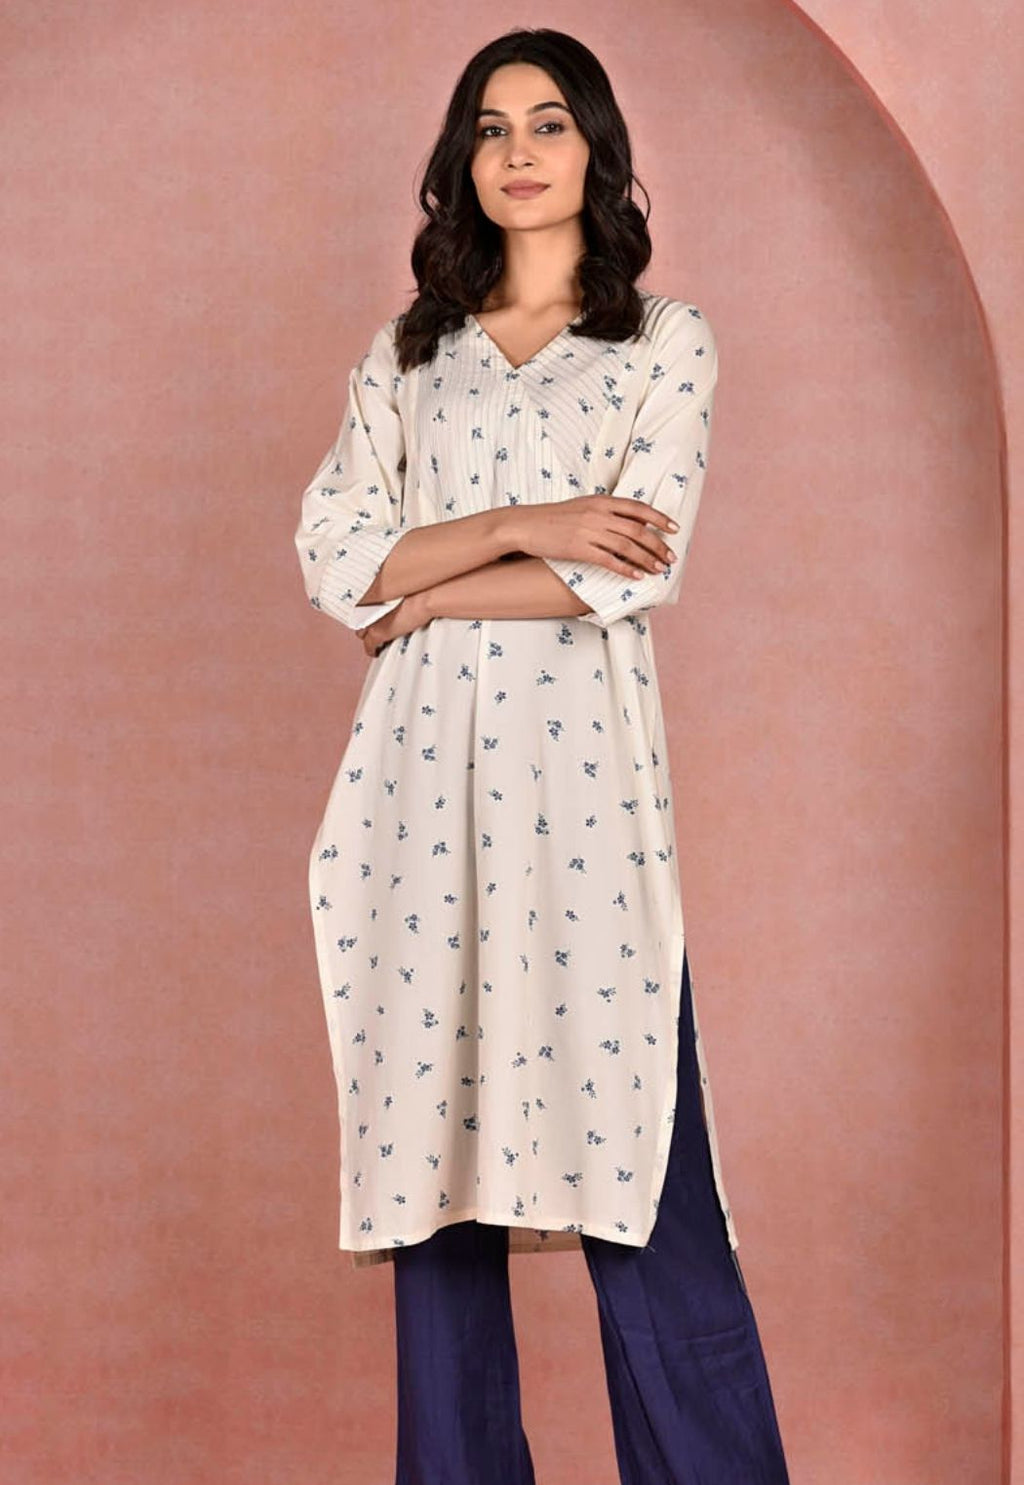 Printed Kurti Designs - 20 Latest Collection For Stylish Look